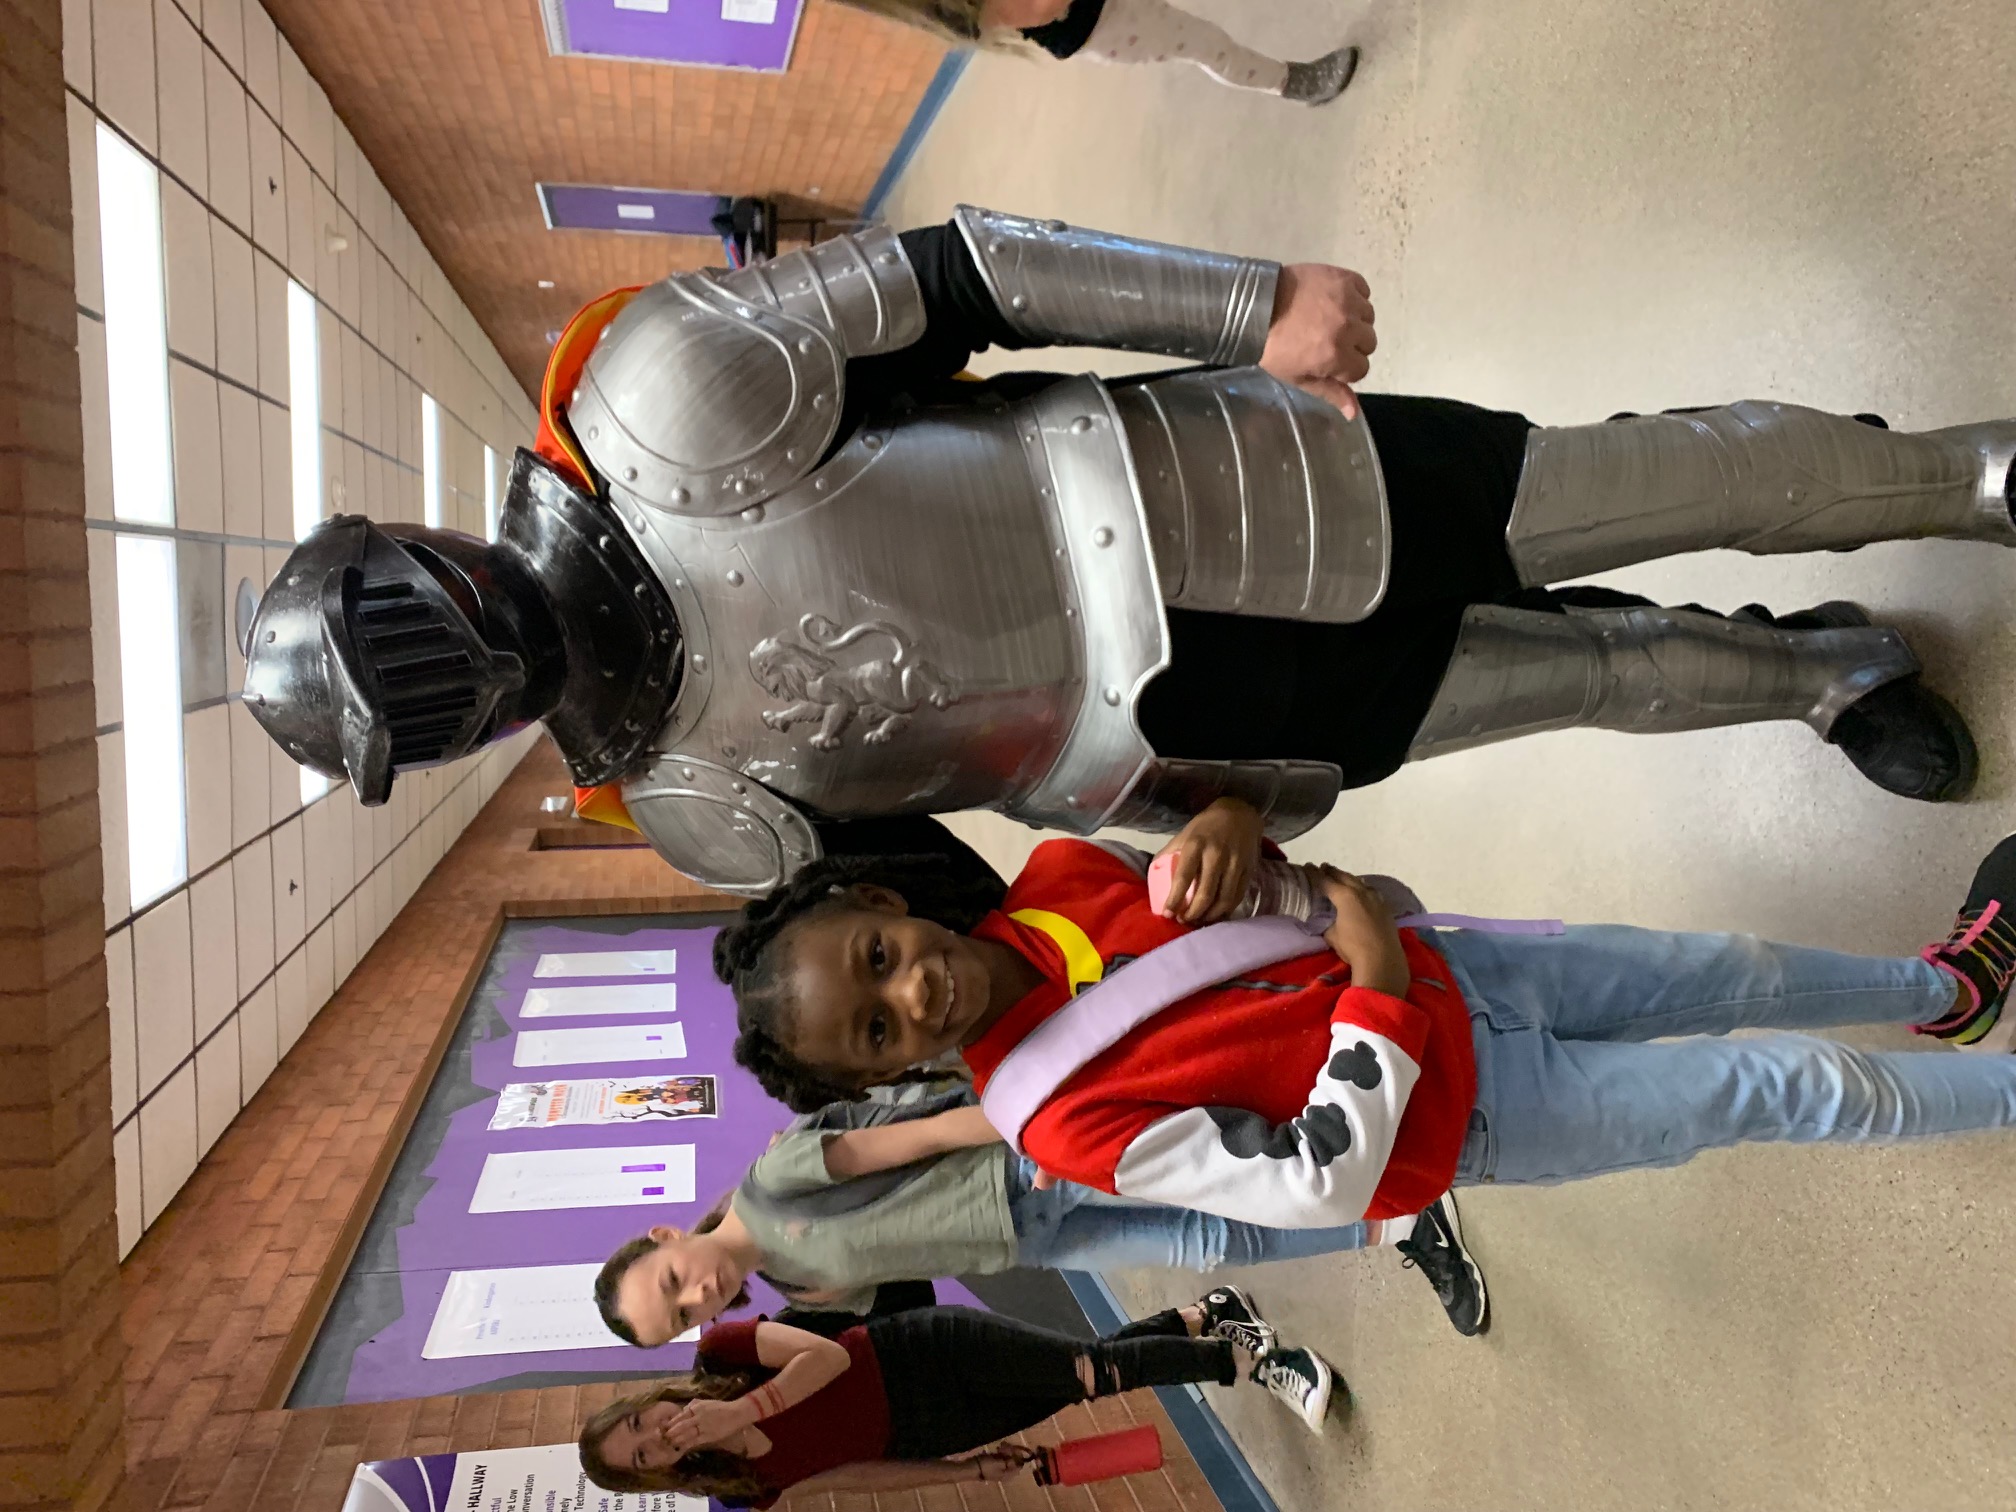 Kingswood's Knight with student